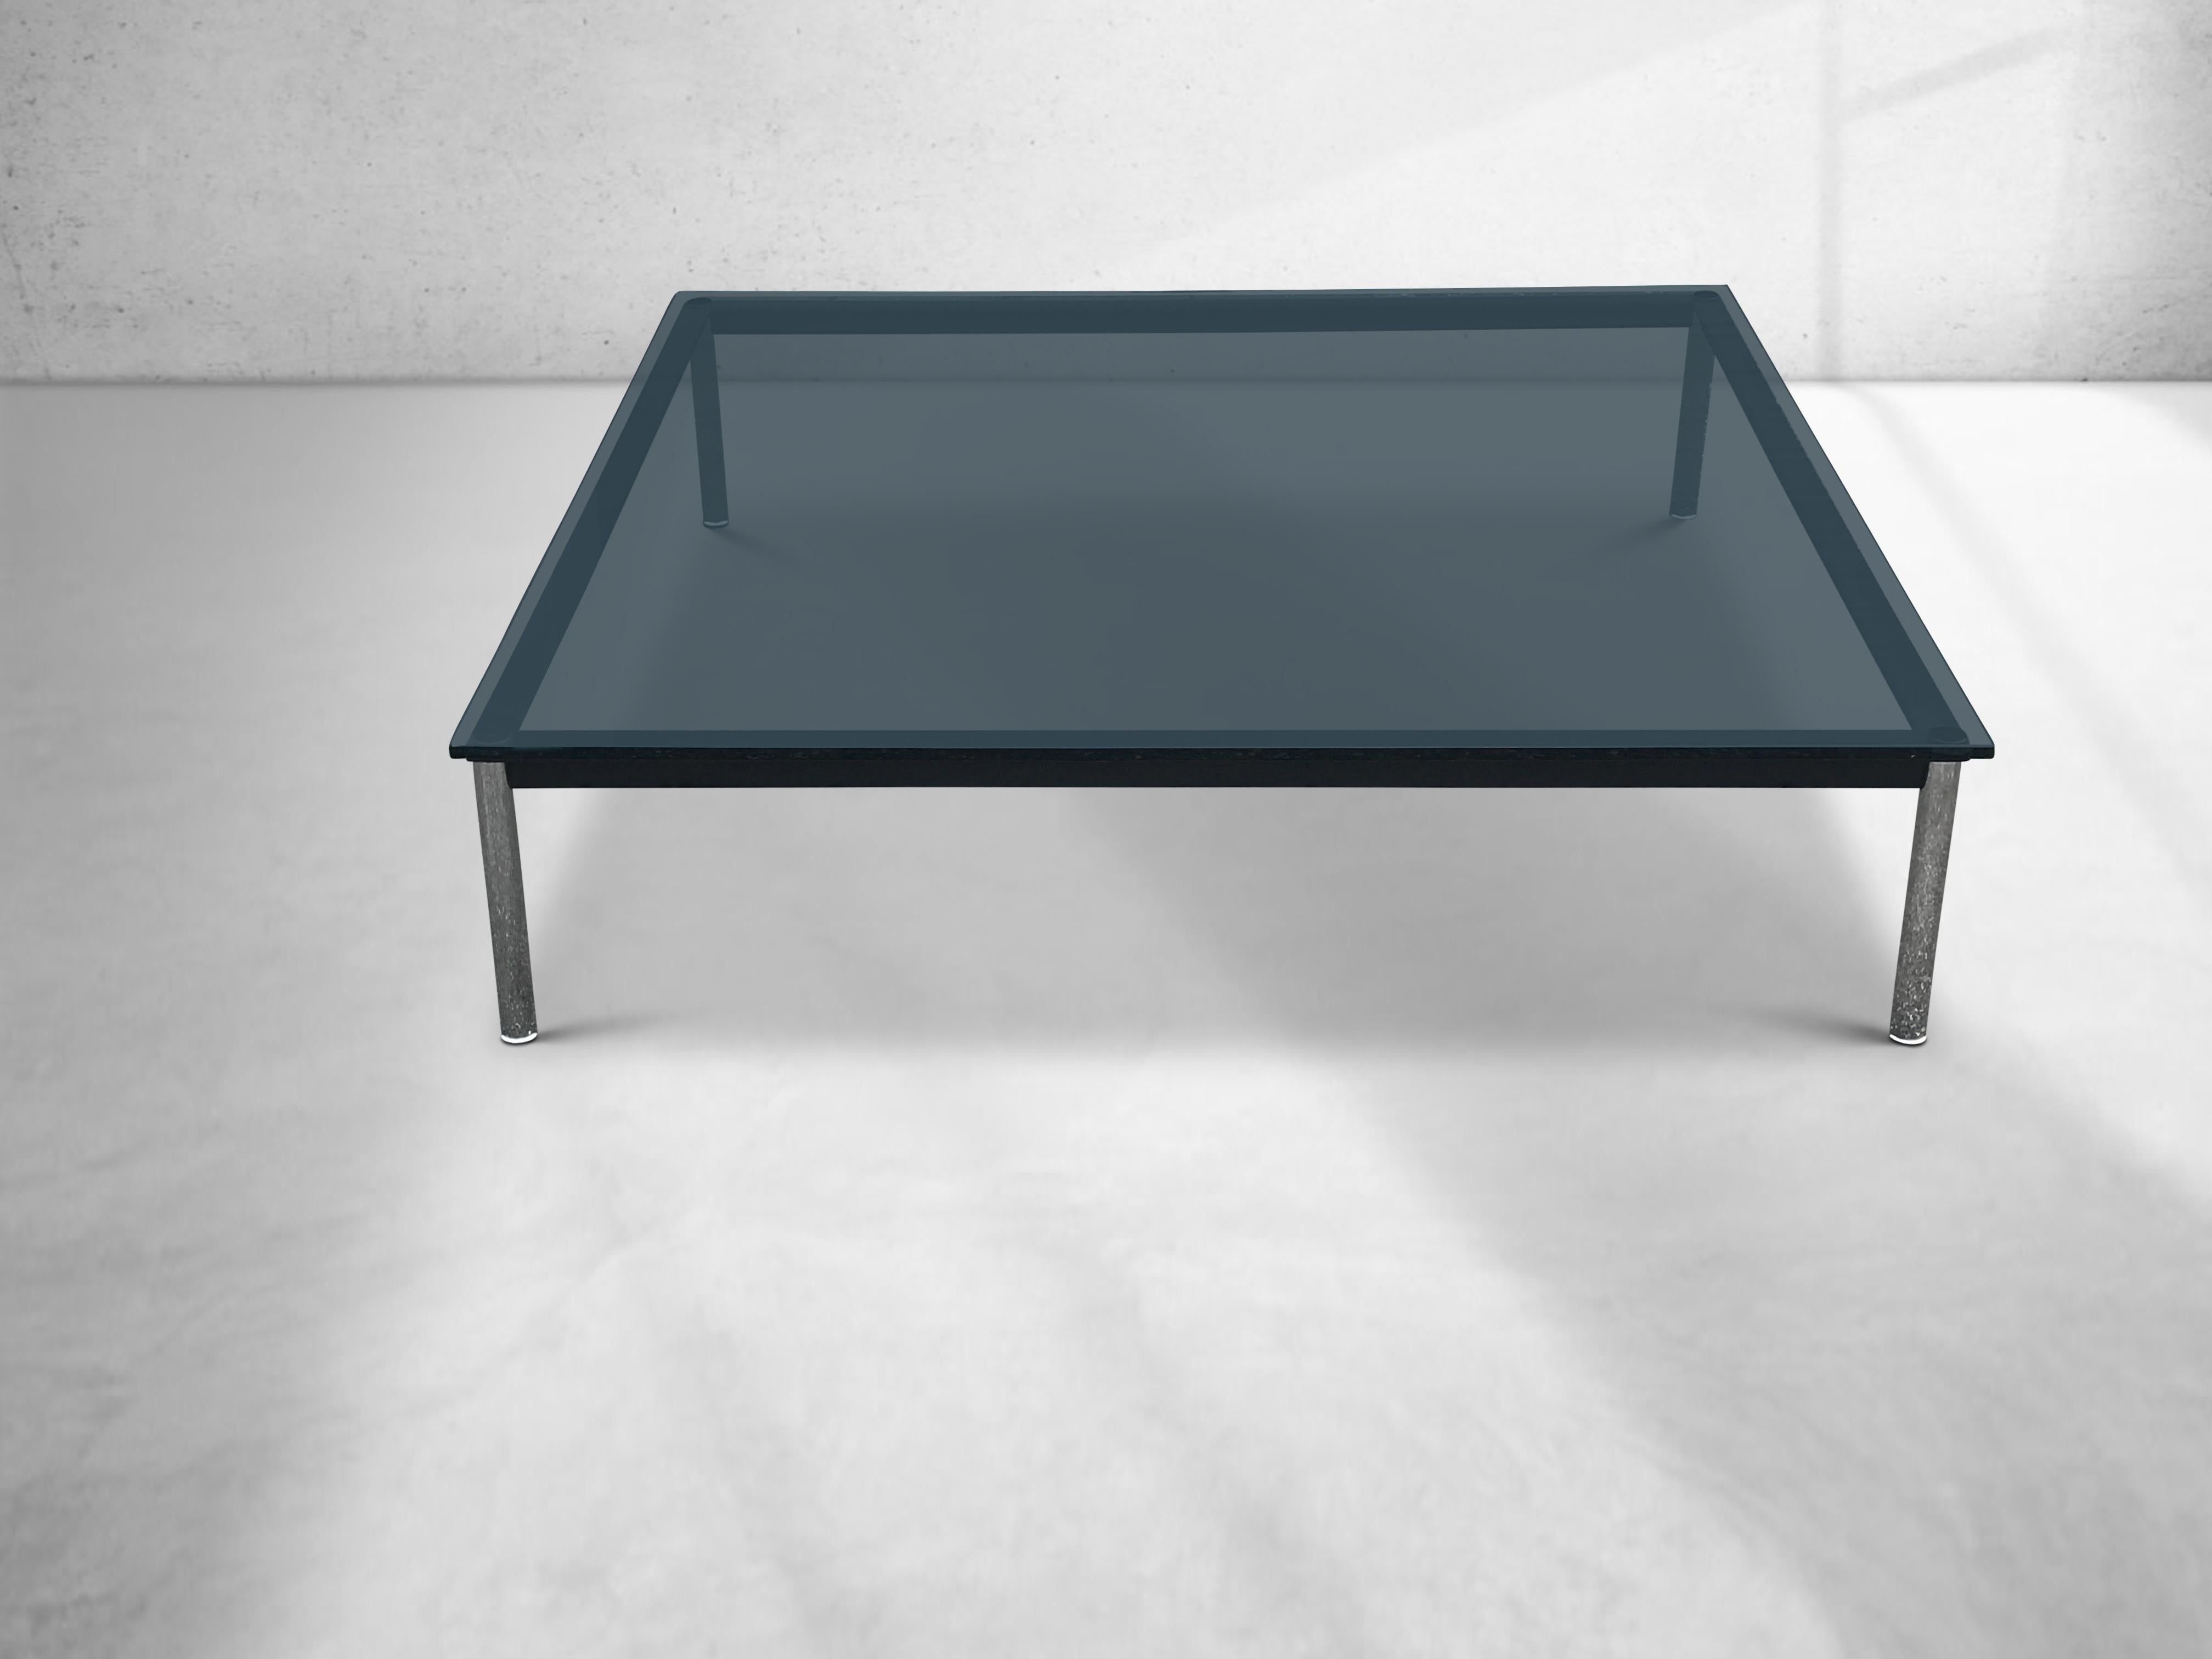 Bauhaus LC10 coffee table by Le Corbusier, Jeanneret and Perriand for Cassina 1990s For Sale